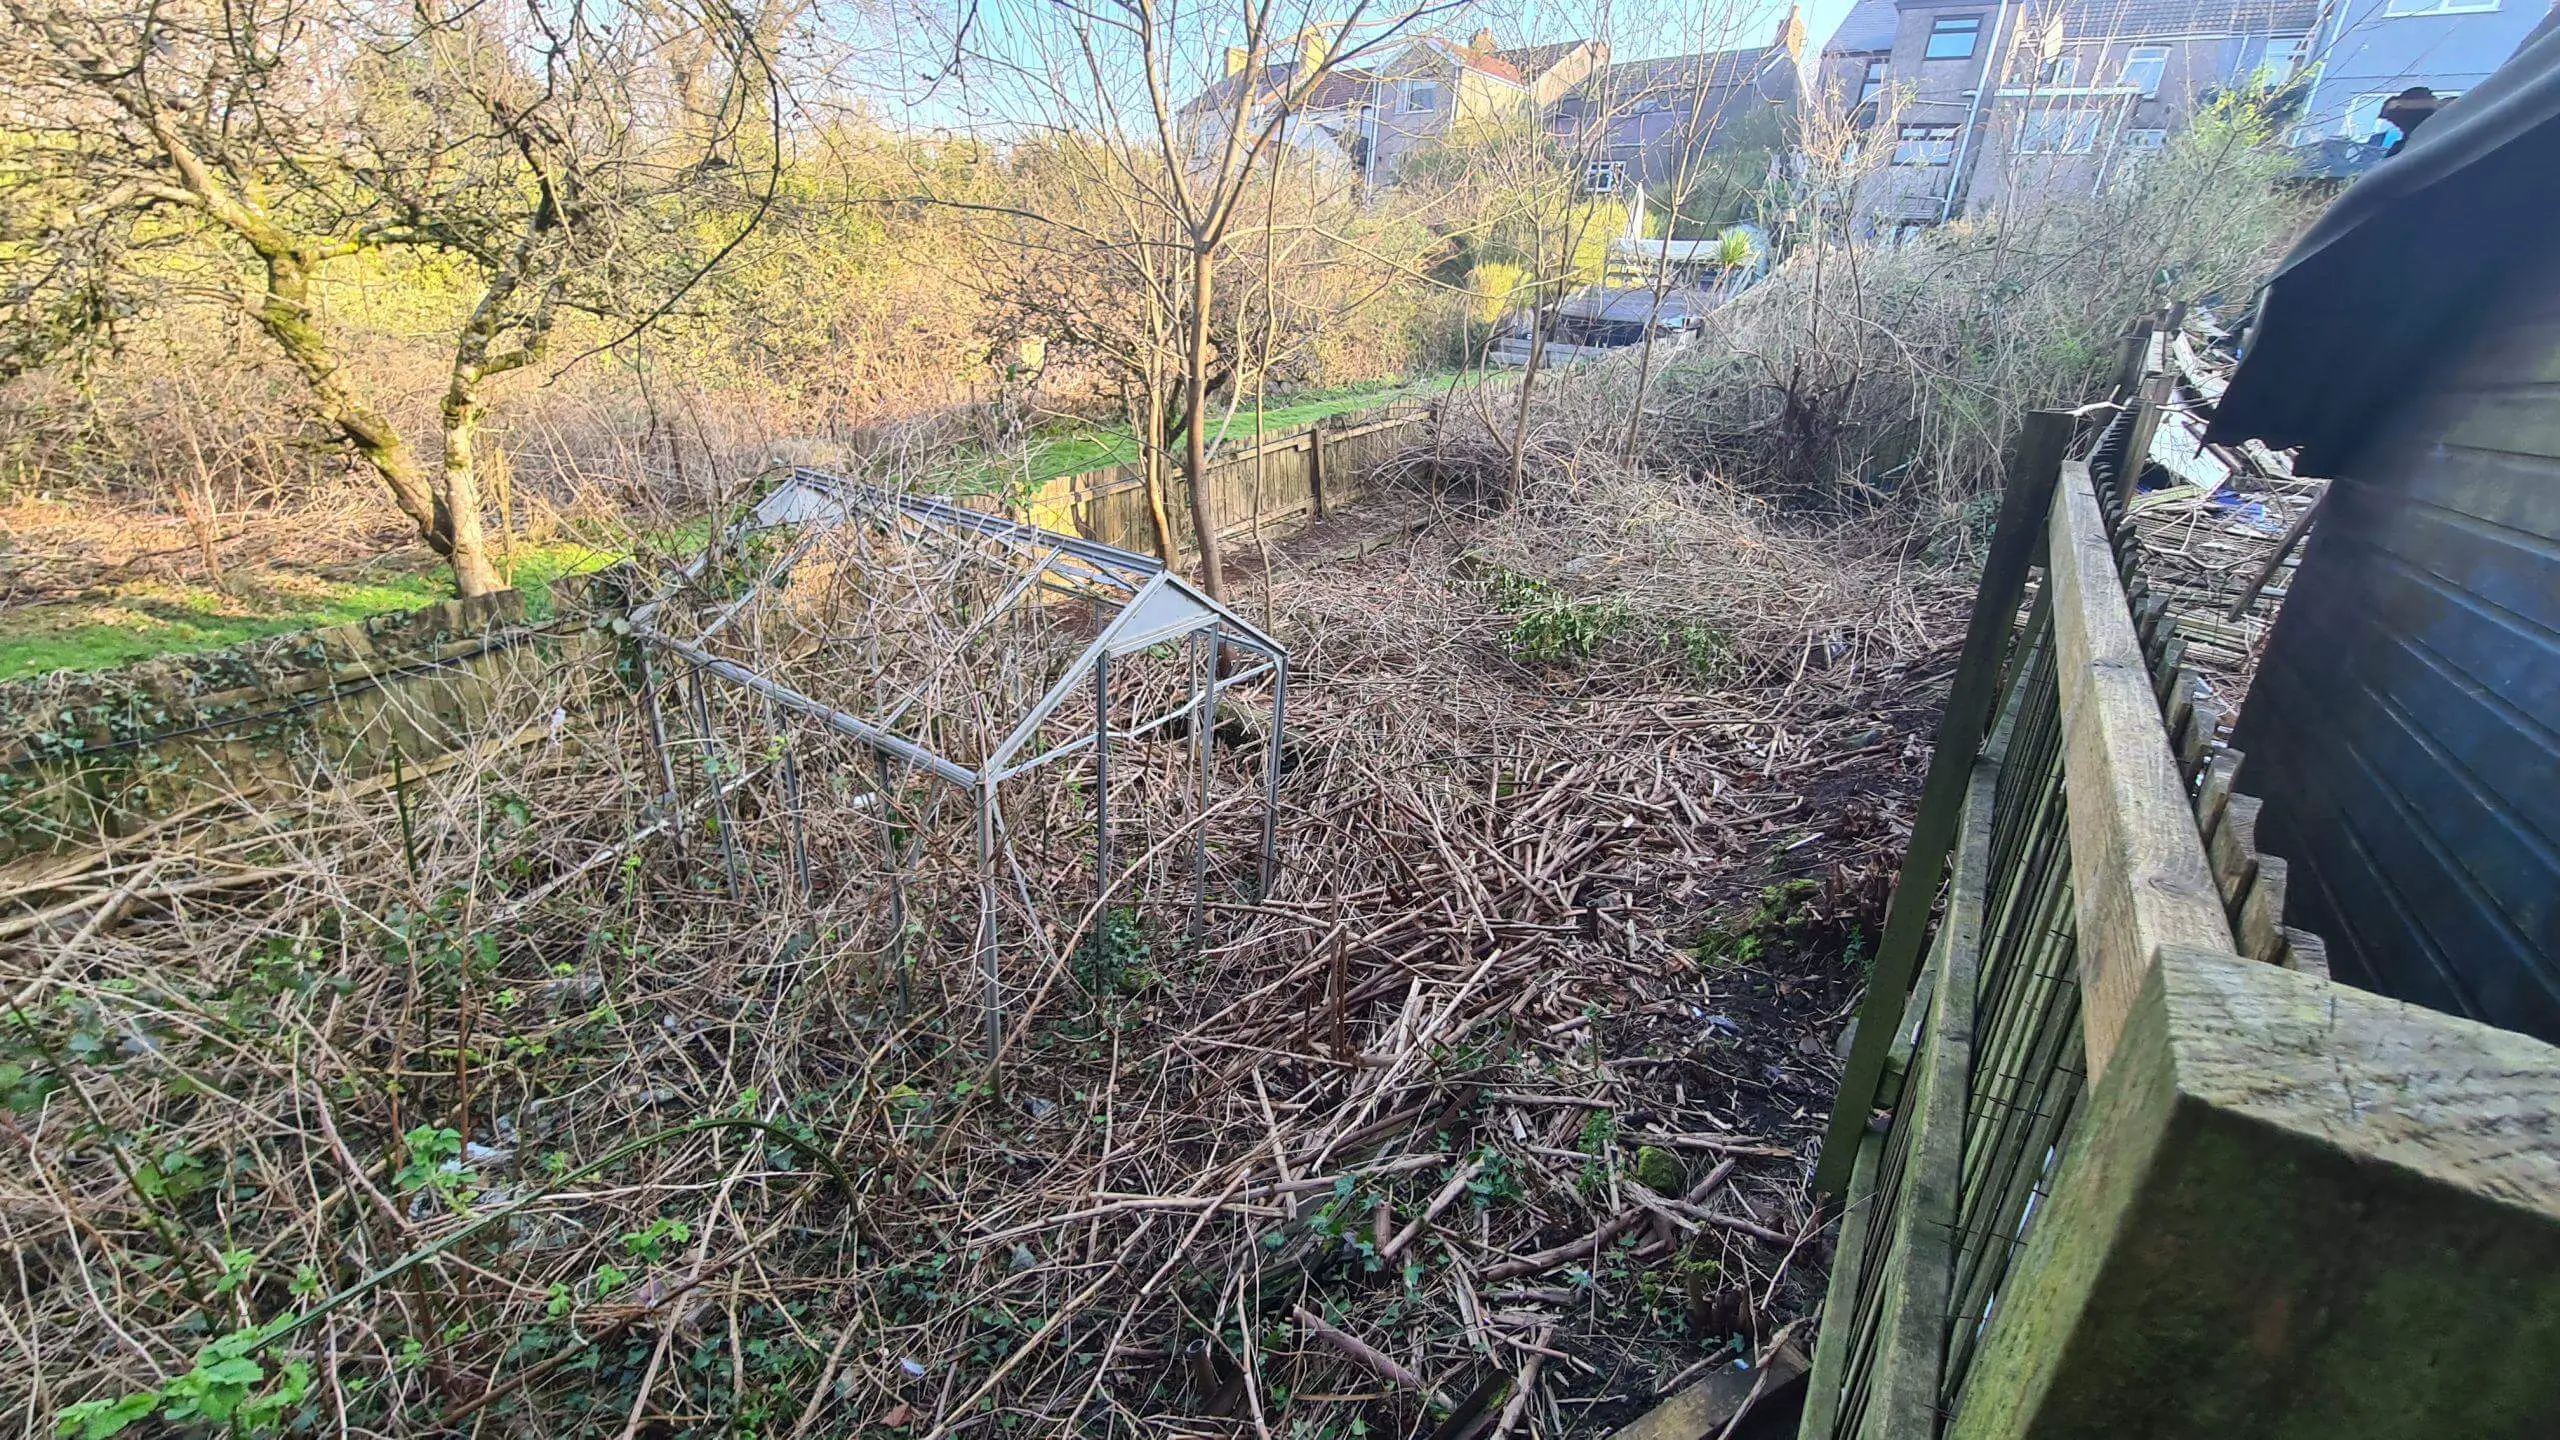 Clearing the area of non native weeds in order to restore the garden back to its former self